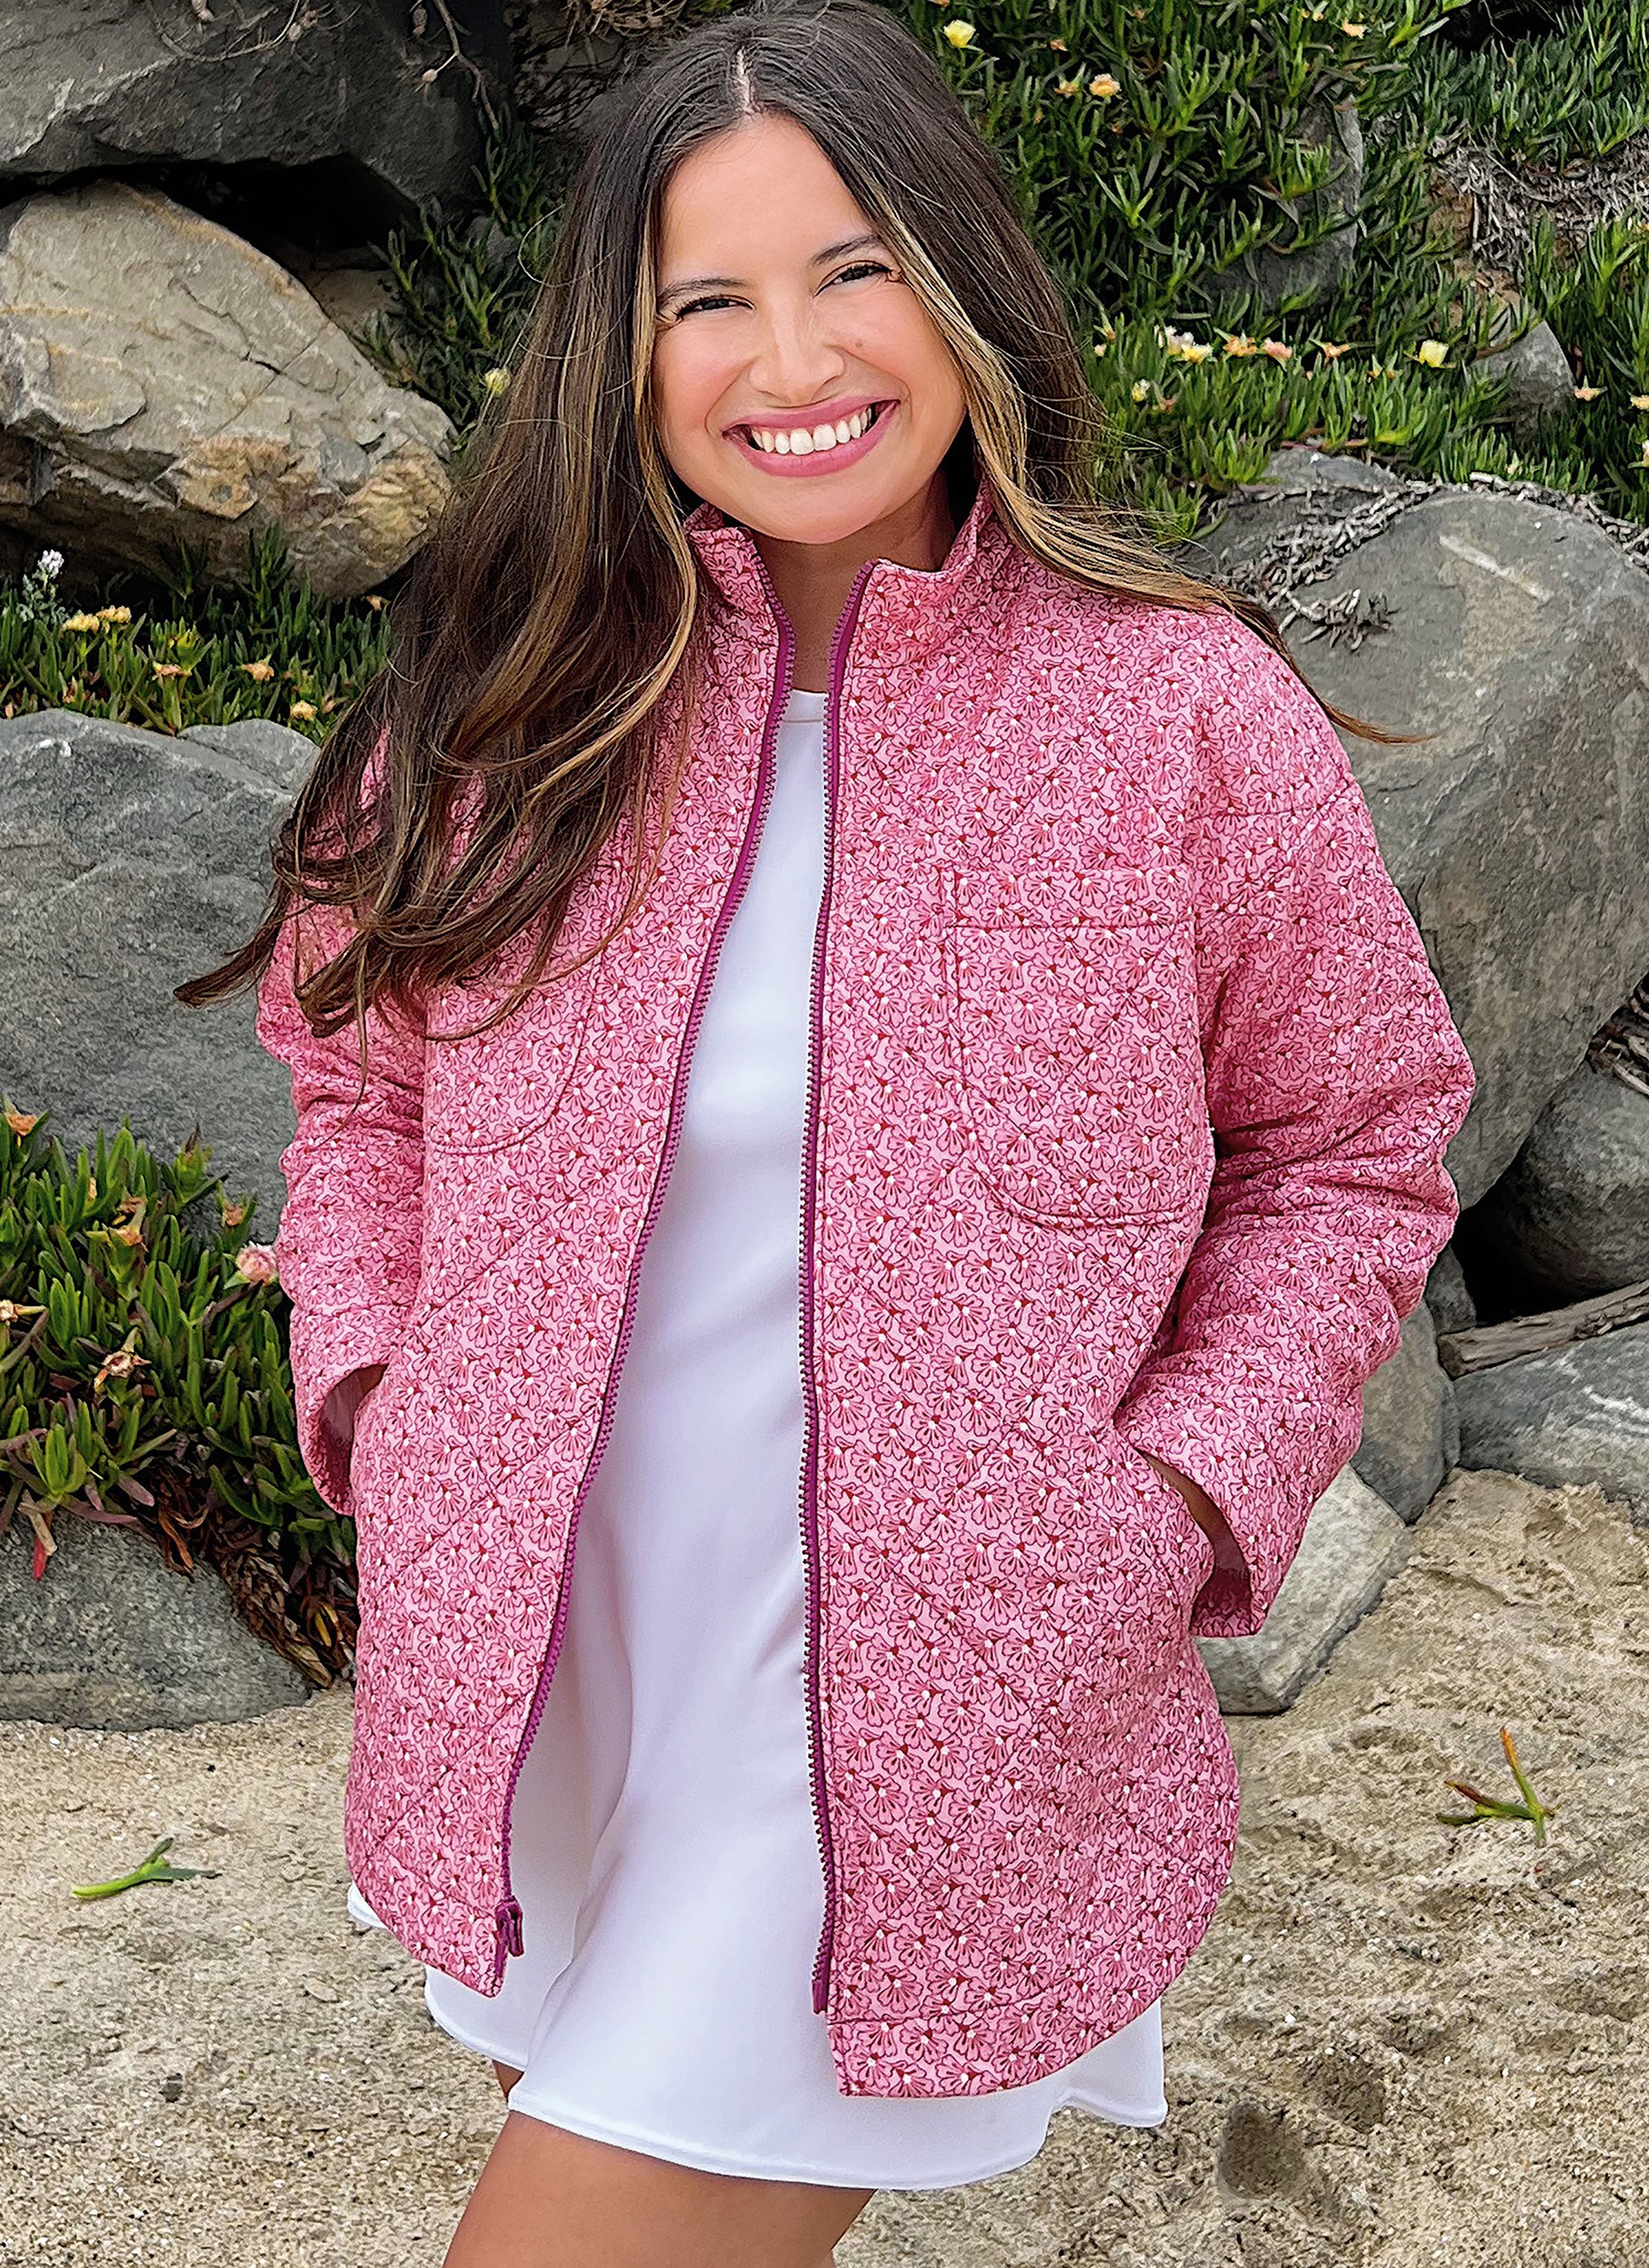 Know Me sewing pattern 2057  Jacket with Optional Hood by Alissah Threads from Jaycotts Sewing Supplies